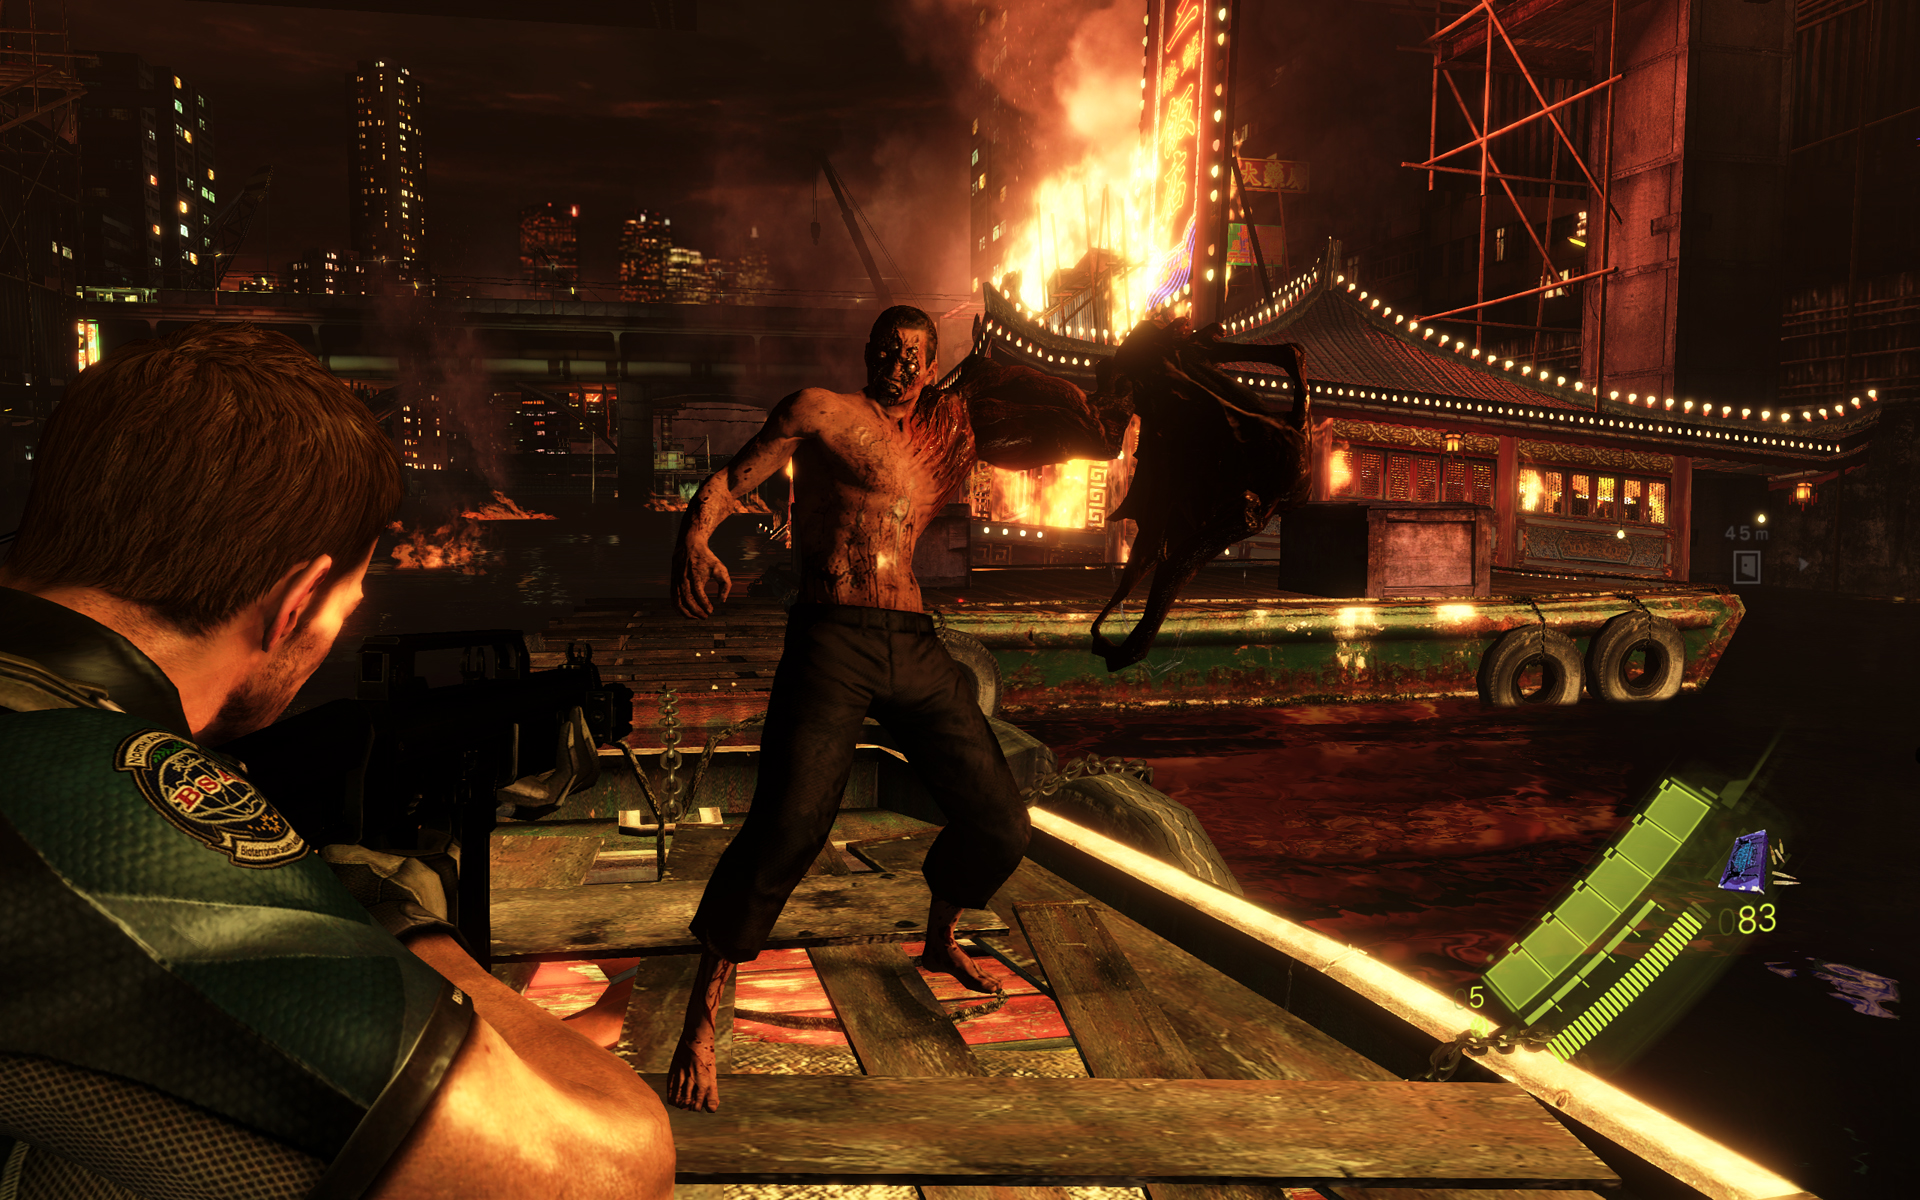 A screencap of Resident Evil 6 (2012): At a dock in a burning city, an over-the-shoulder camera sees Chris Redfield point an assault rifle at the stomach of a man with a heavily mutated left arm, a houseboat with a pointed roof is ablaze in the background